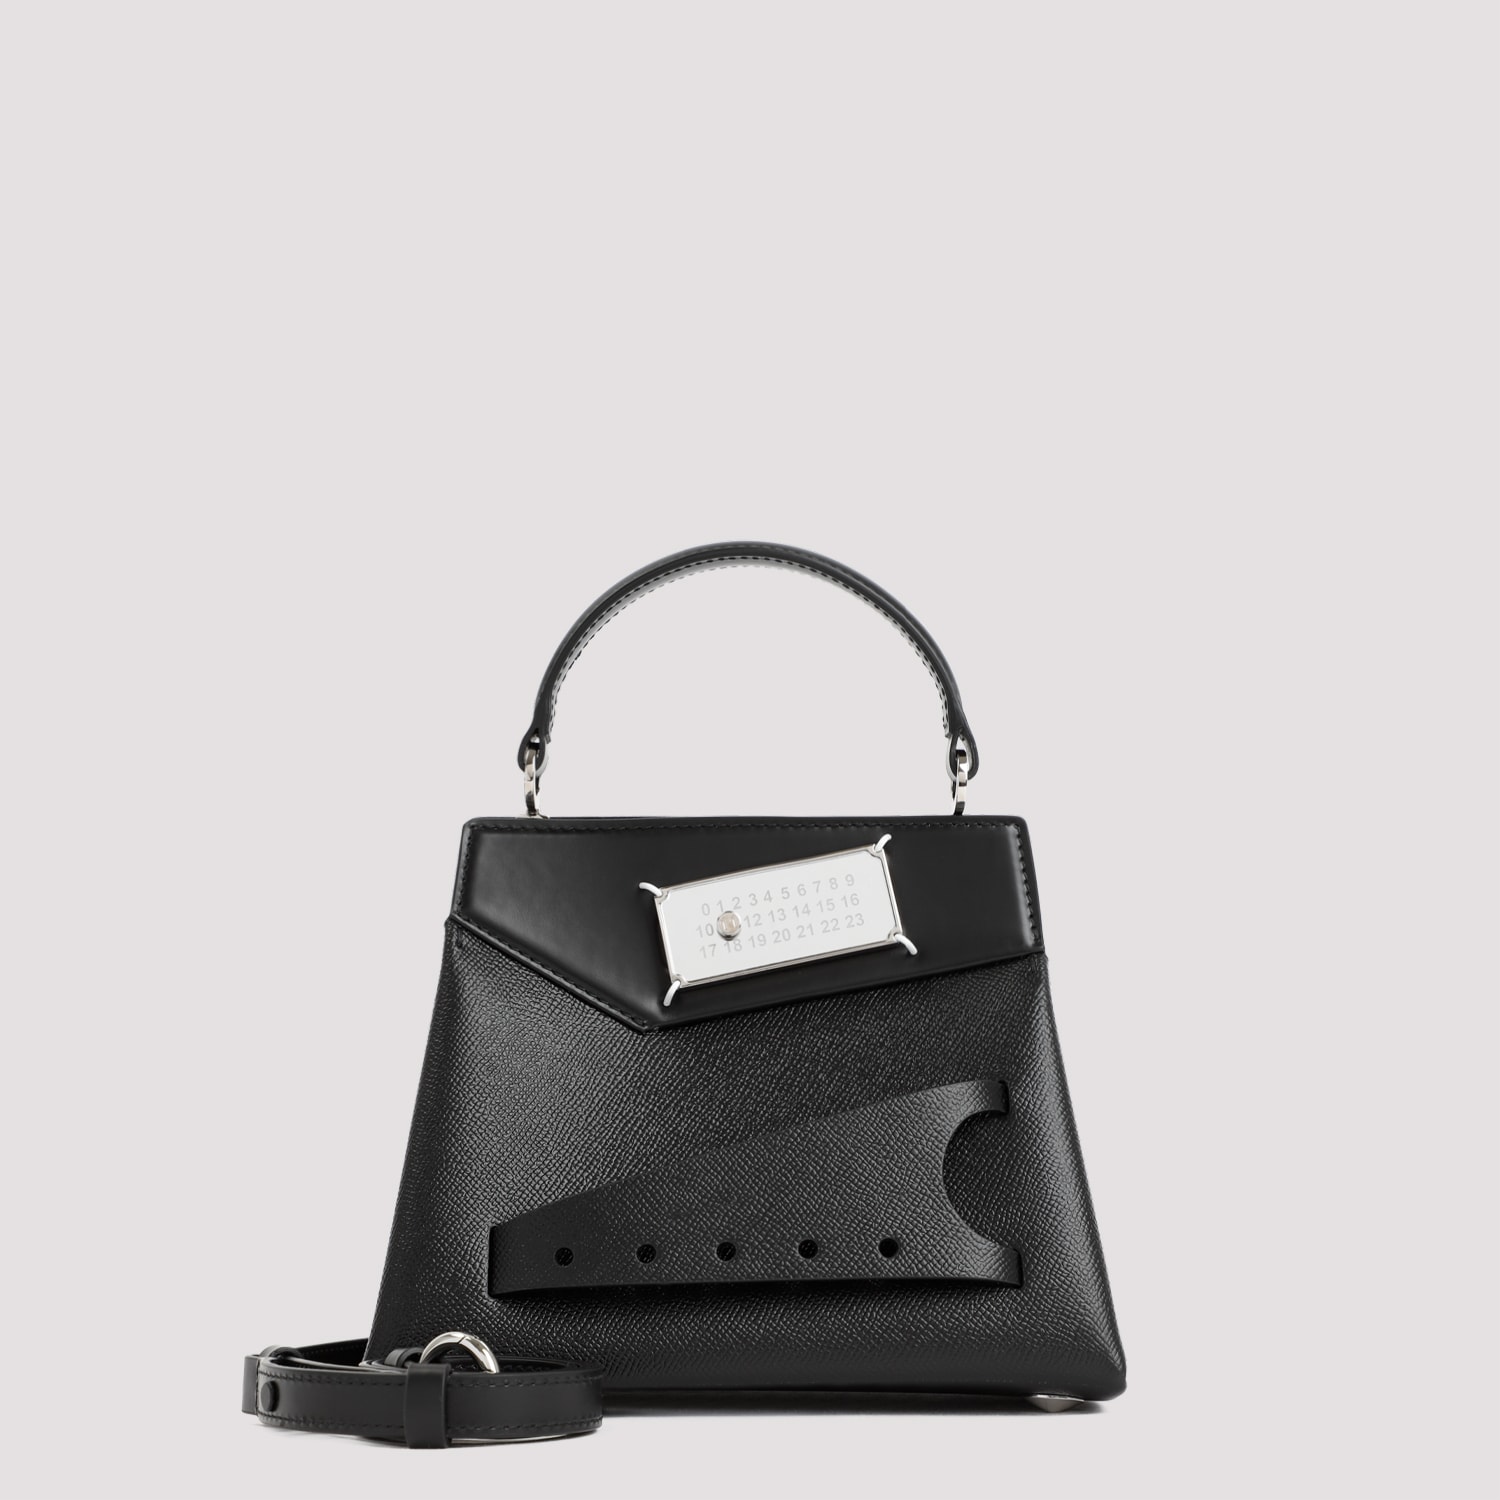 Snatched Leather Small Handbag